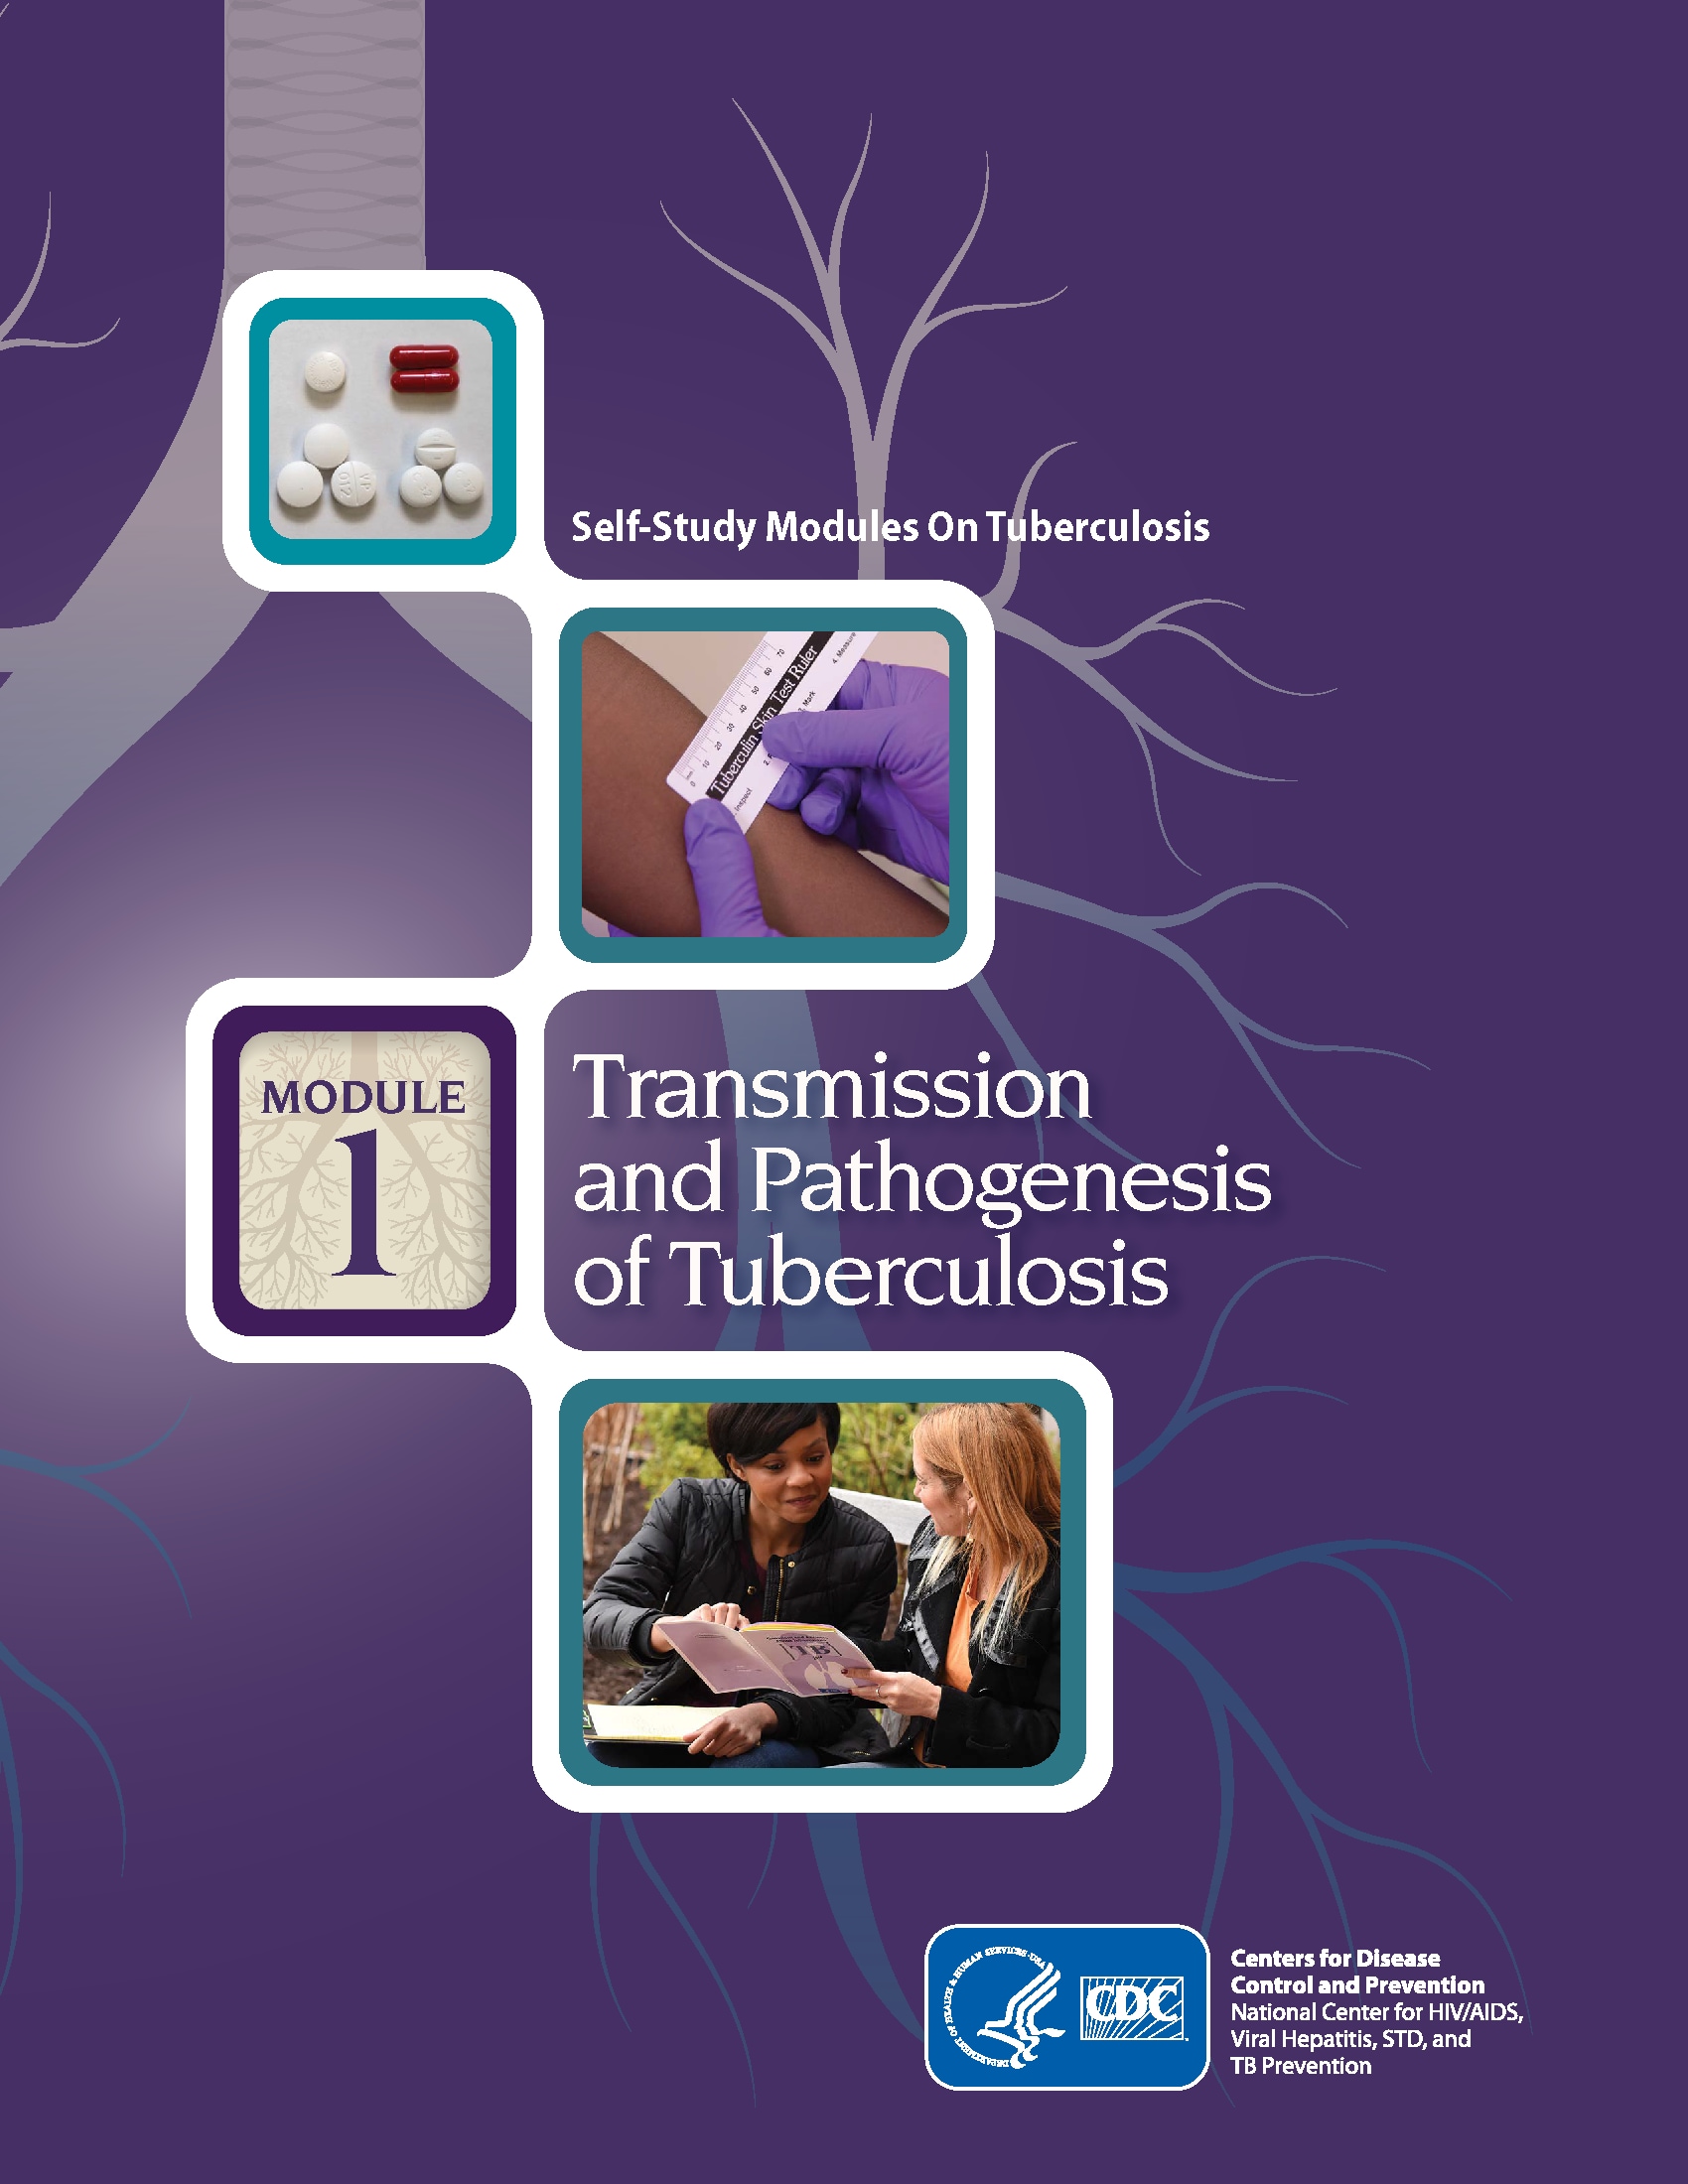 Self-Study Modules on Tuberculosis: Transmission and Pathogenesis of Tuberculosis